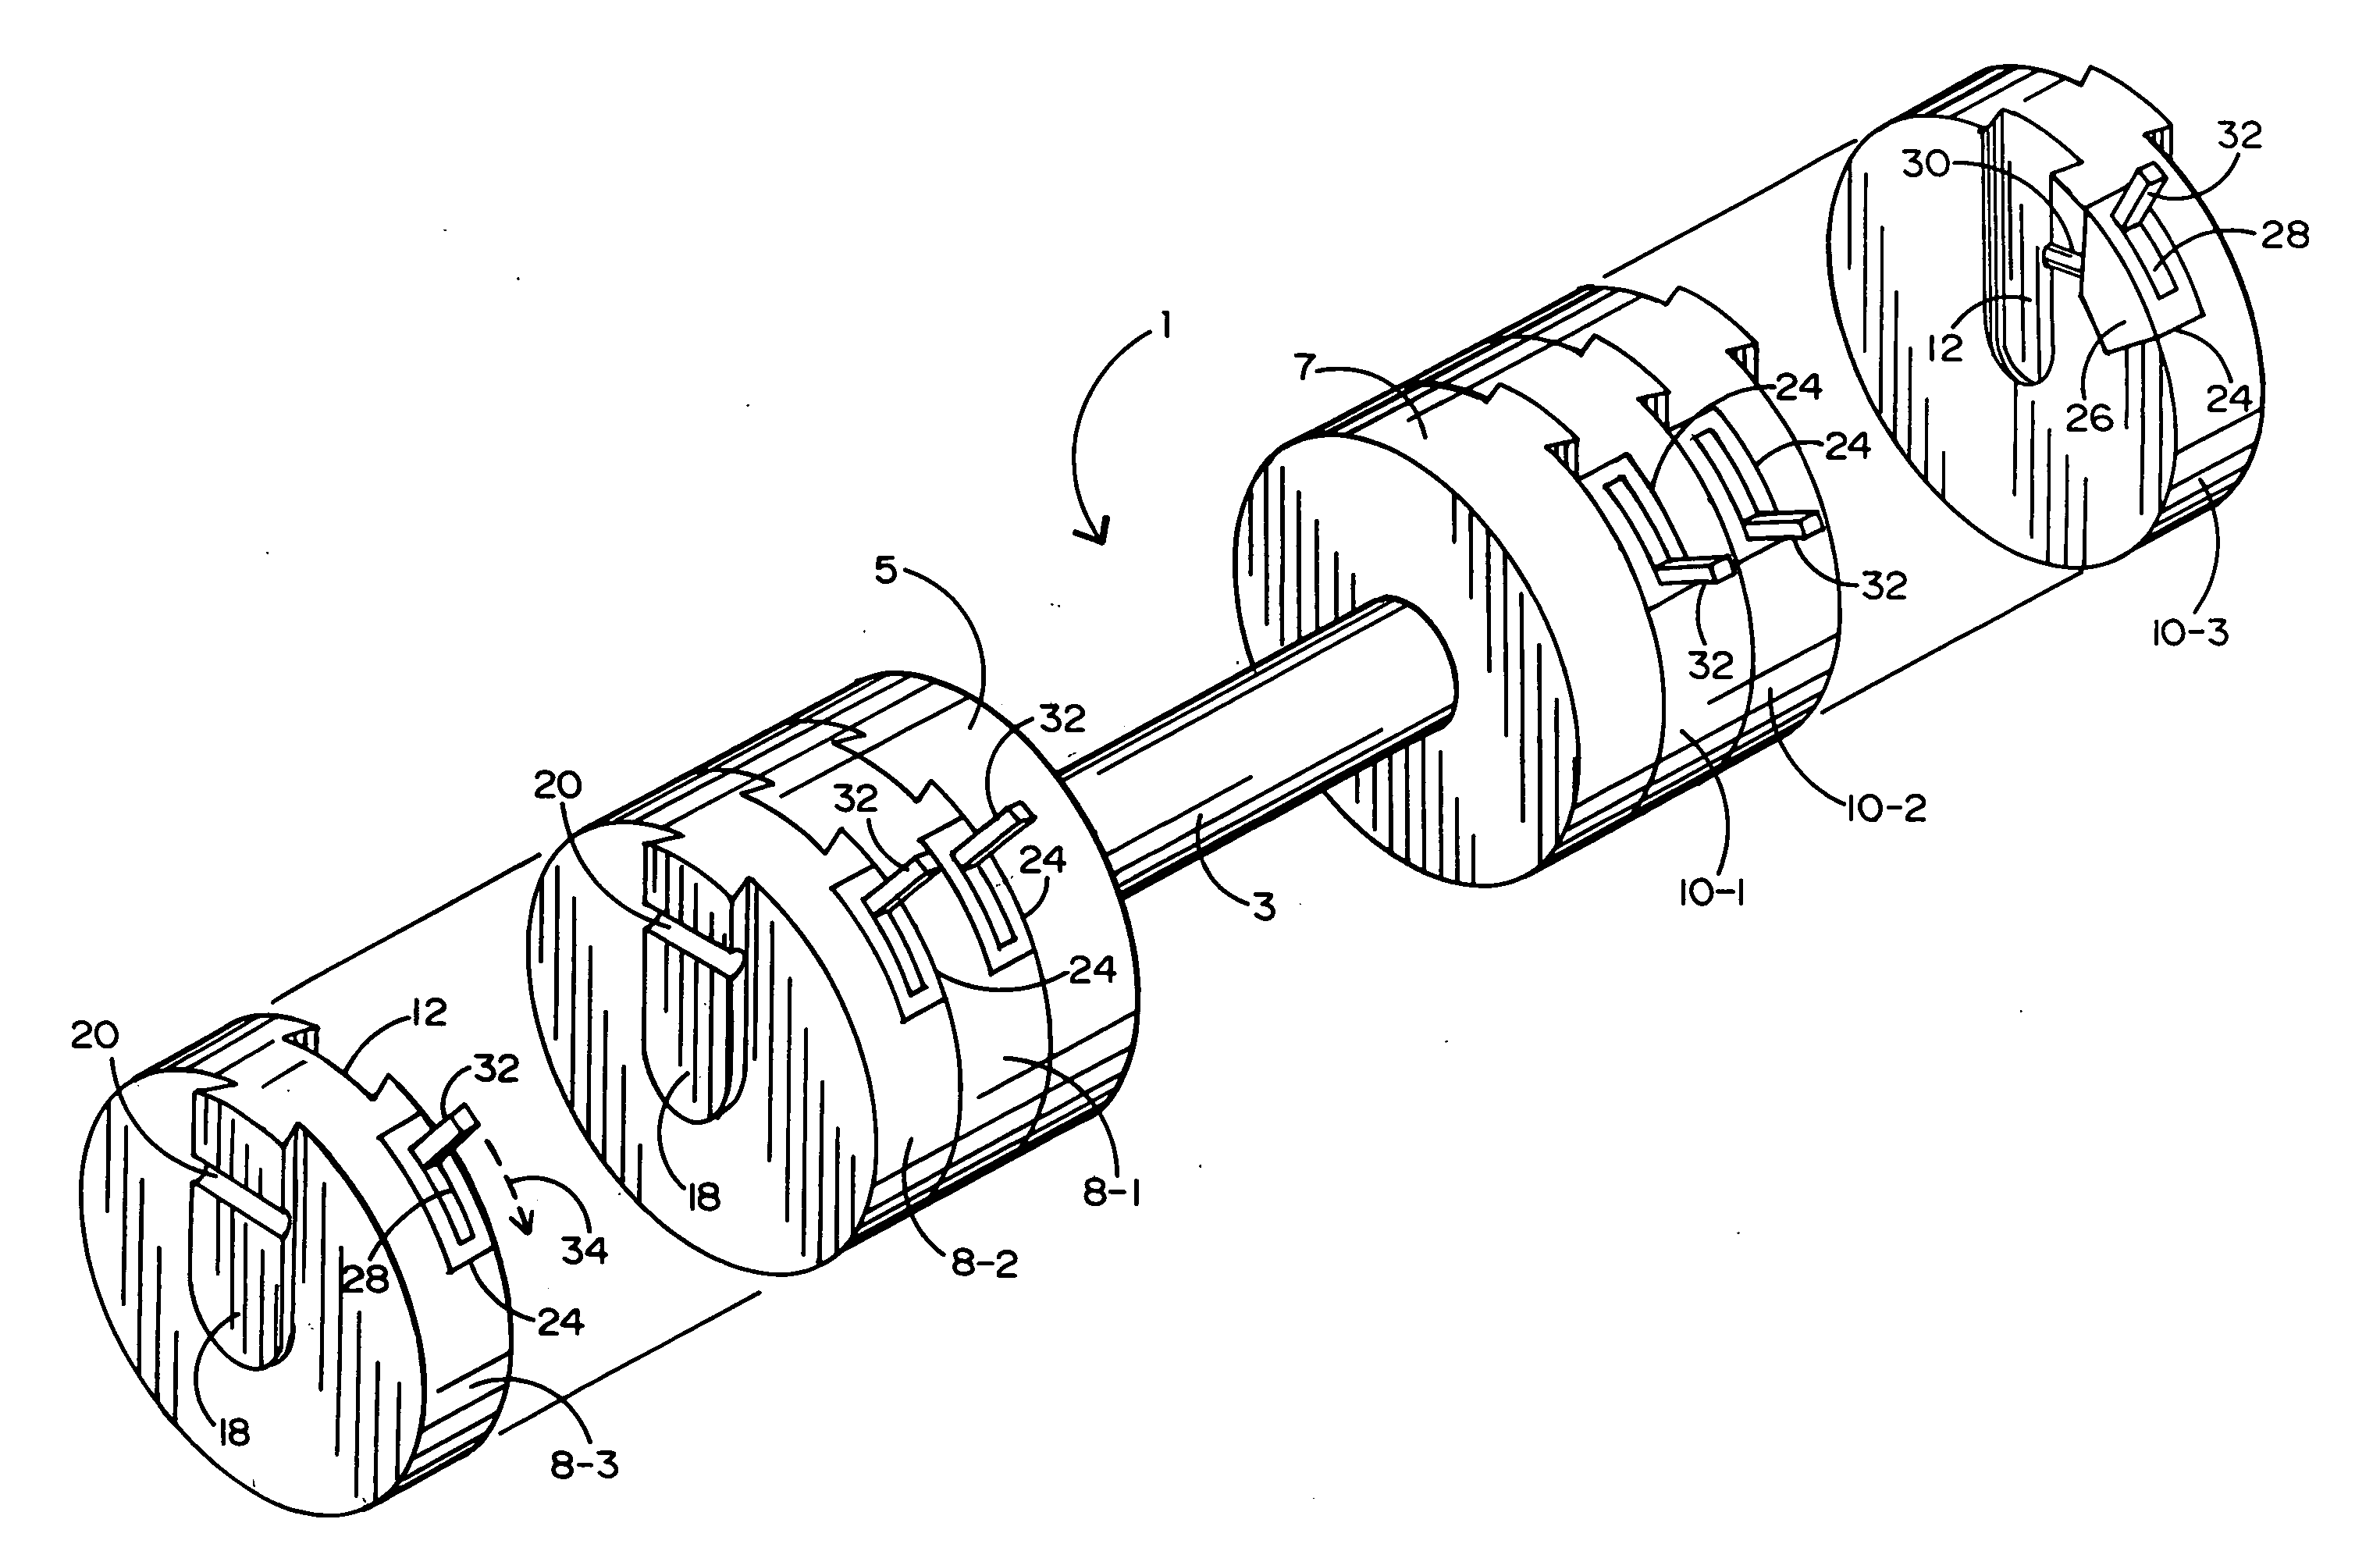 Dumbbell weight training device having detachable weight plates